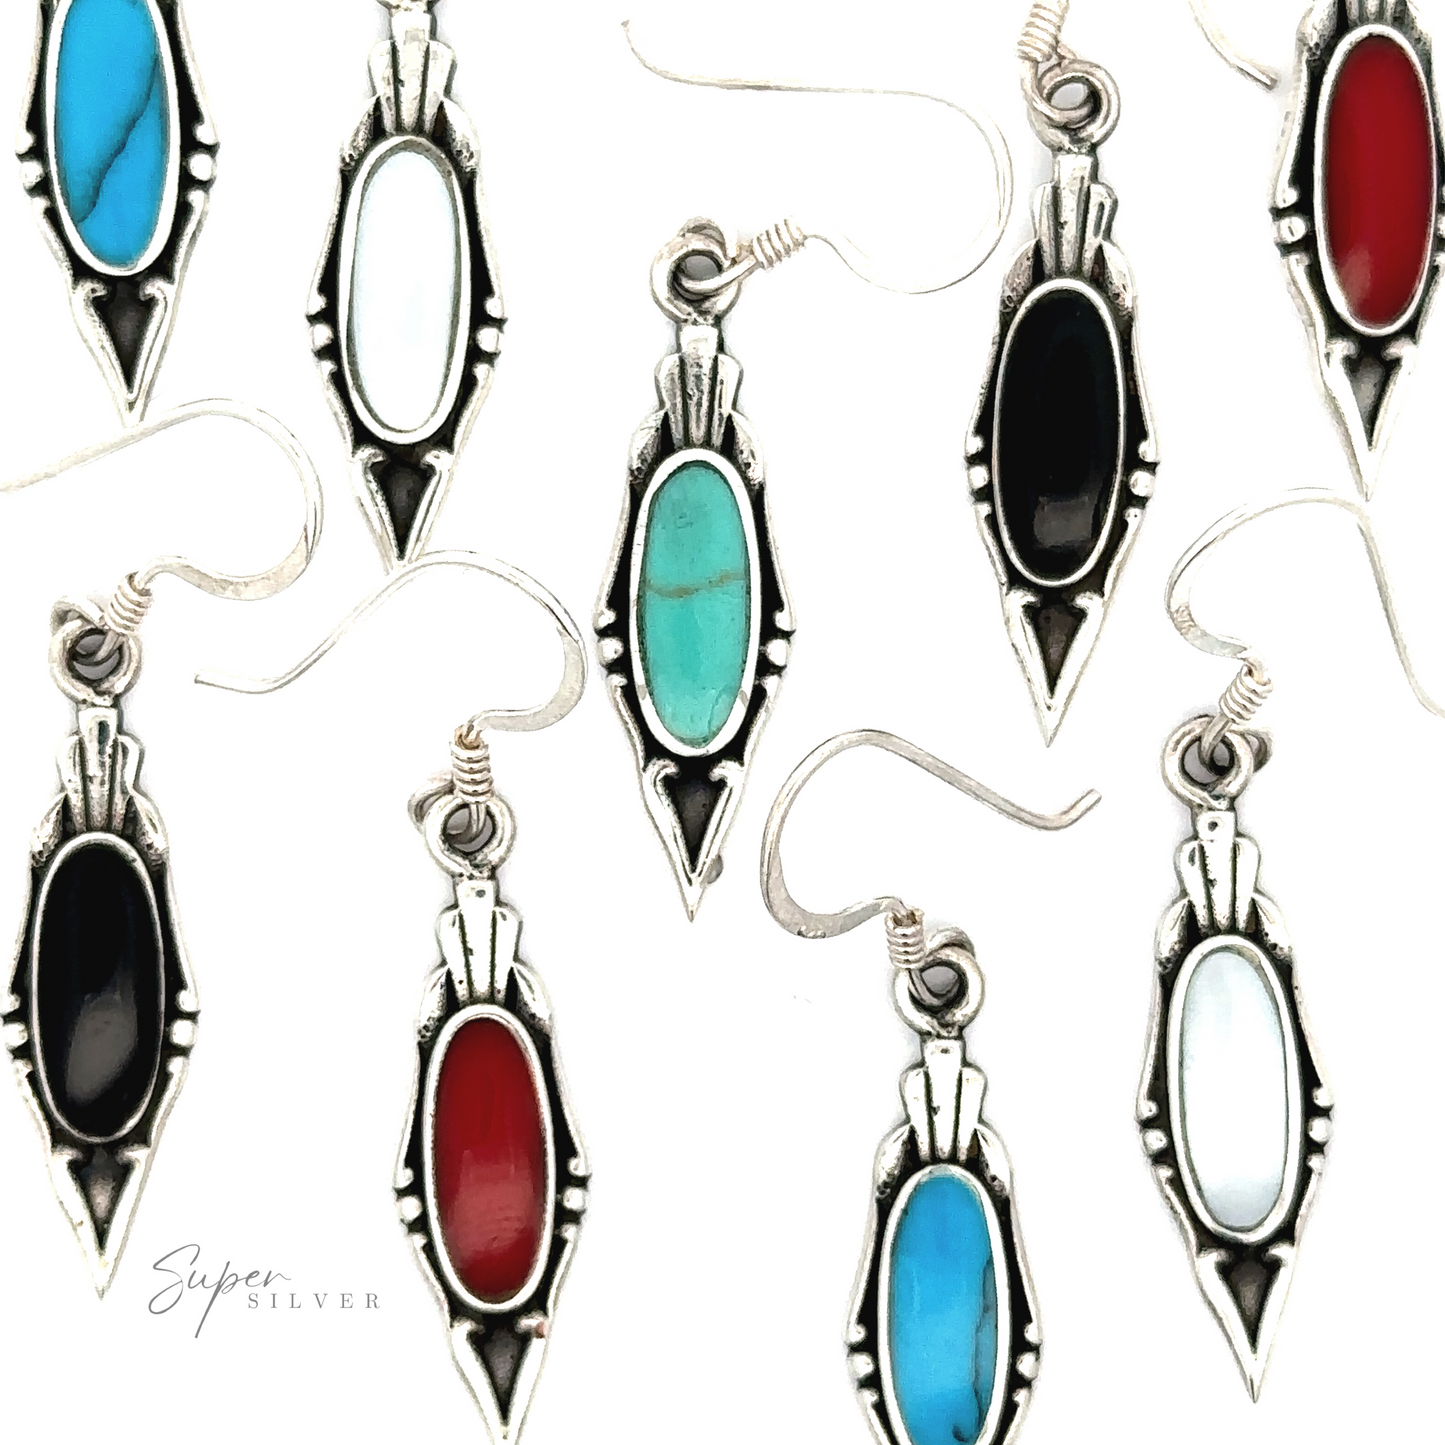 
                  
                    A collection of Elegant Inlaid Earrings with Oval Stone with various oval stones, including turquoise, black, red, and white, laid out on a white background.
                  
                